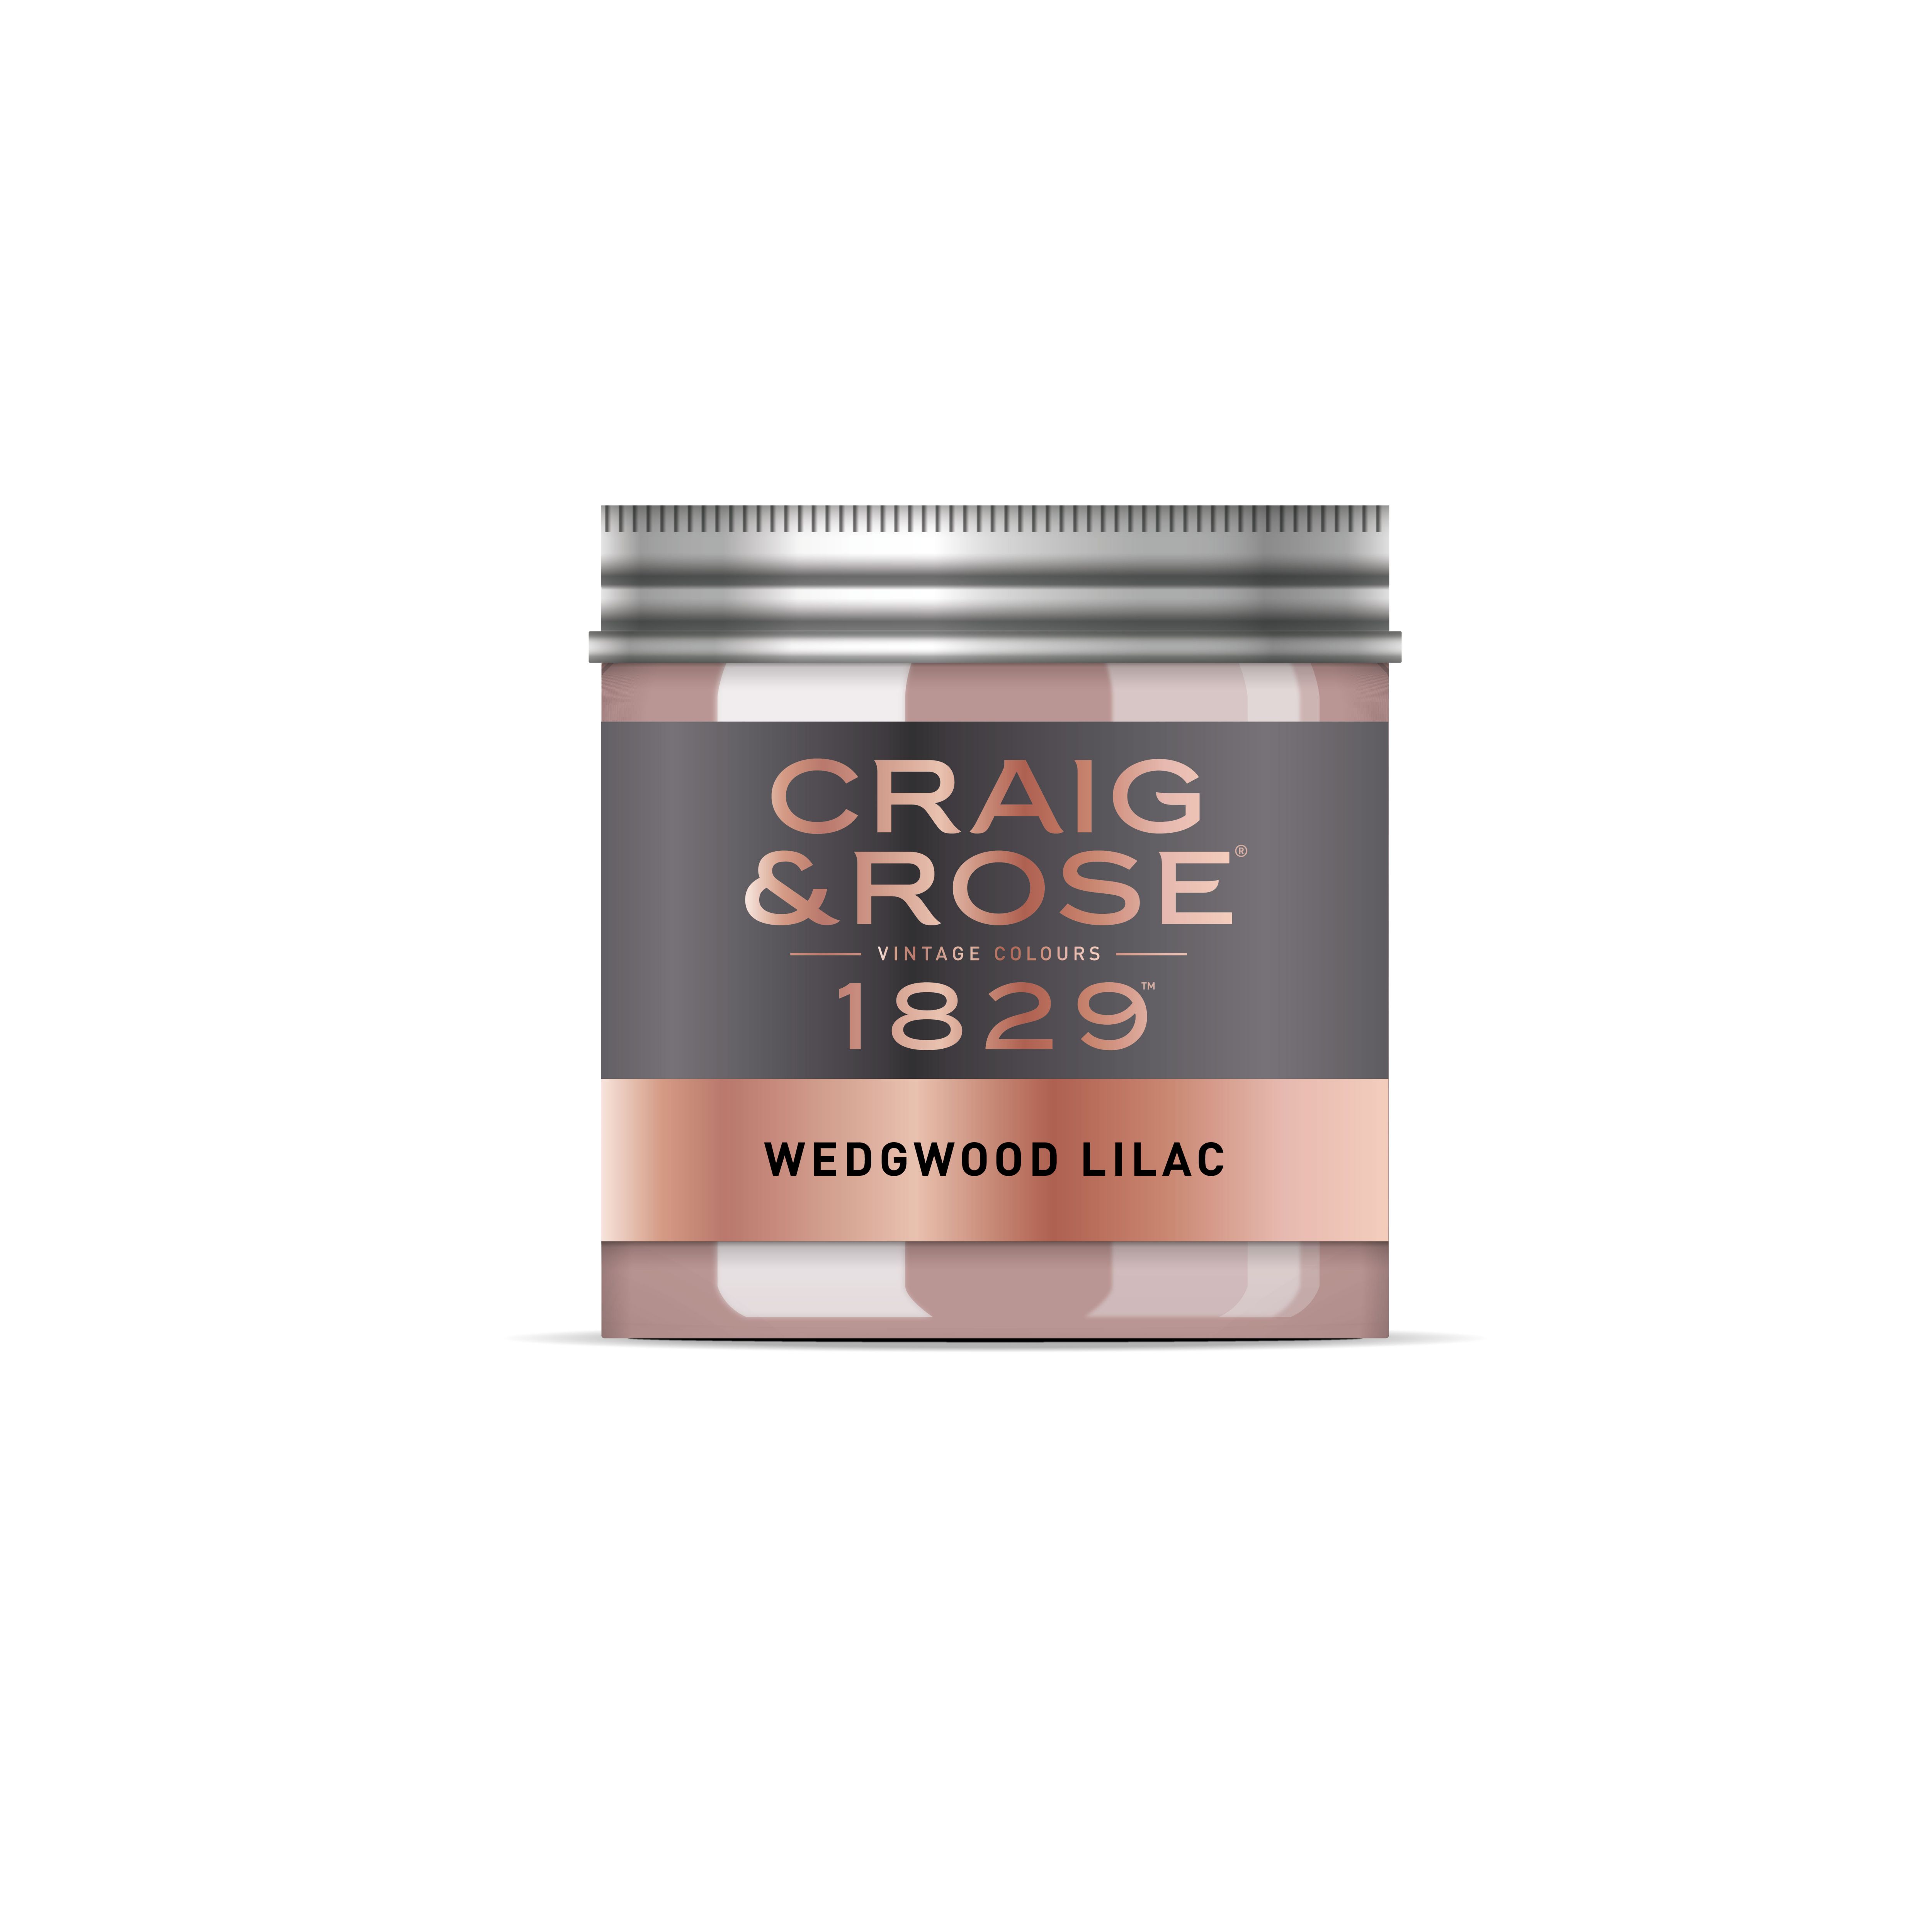 Craig & Rose 1829 Wedgwood Lilac Chalky Emulsion paint, 50ml